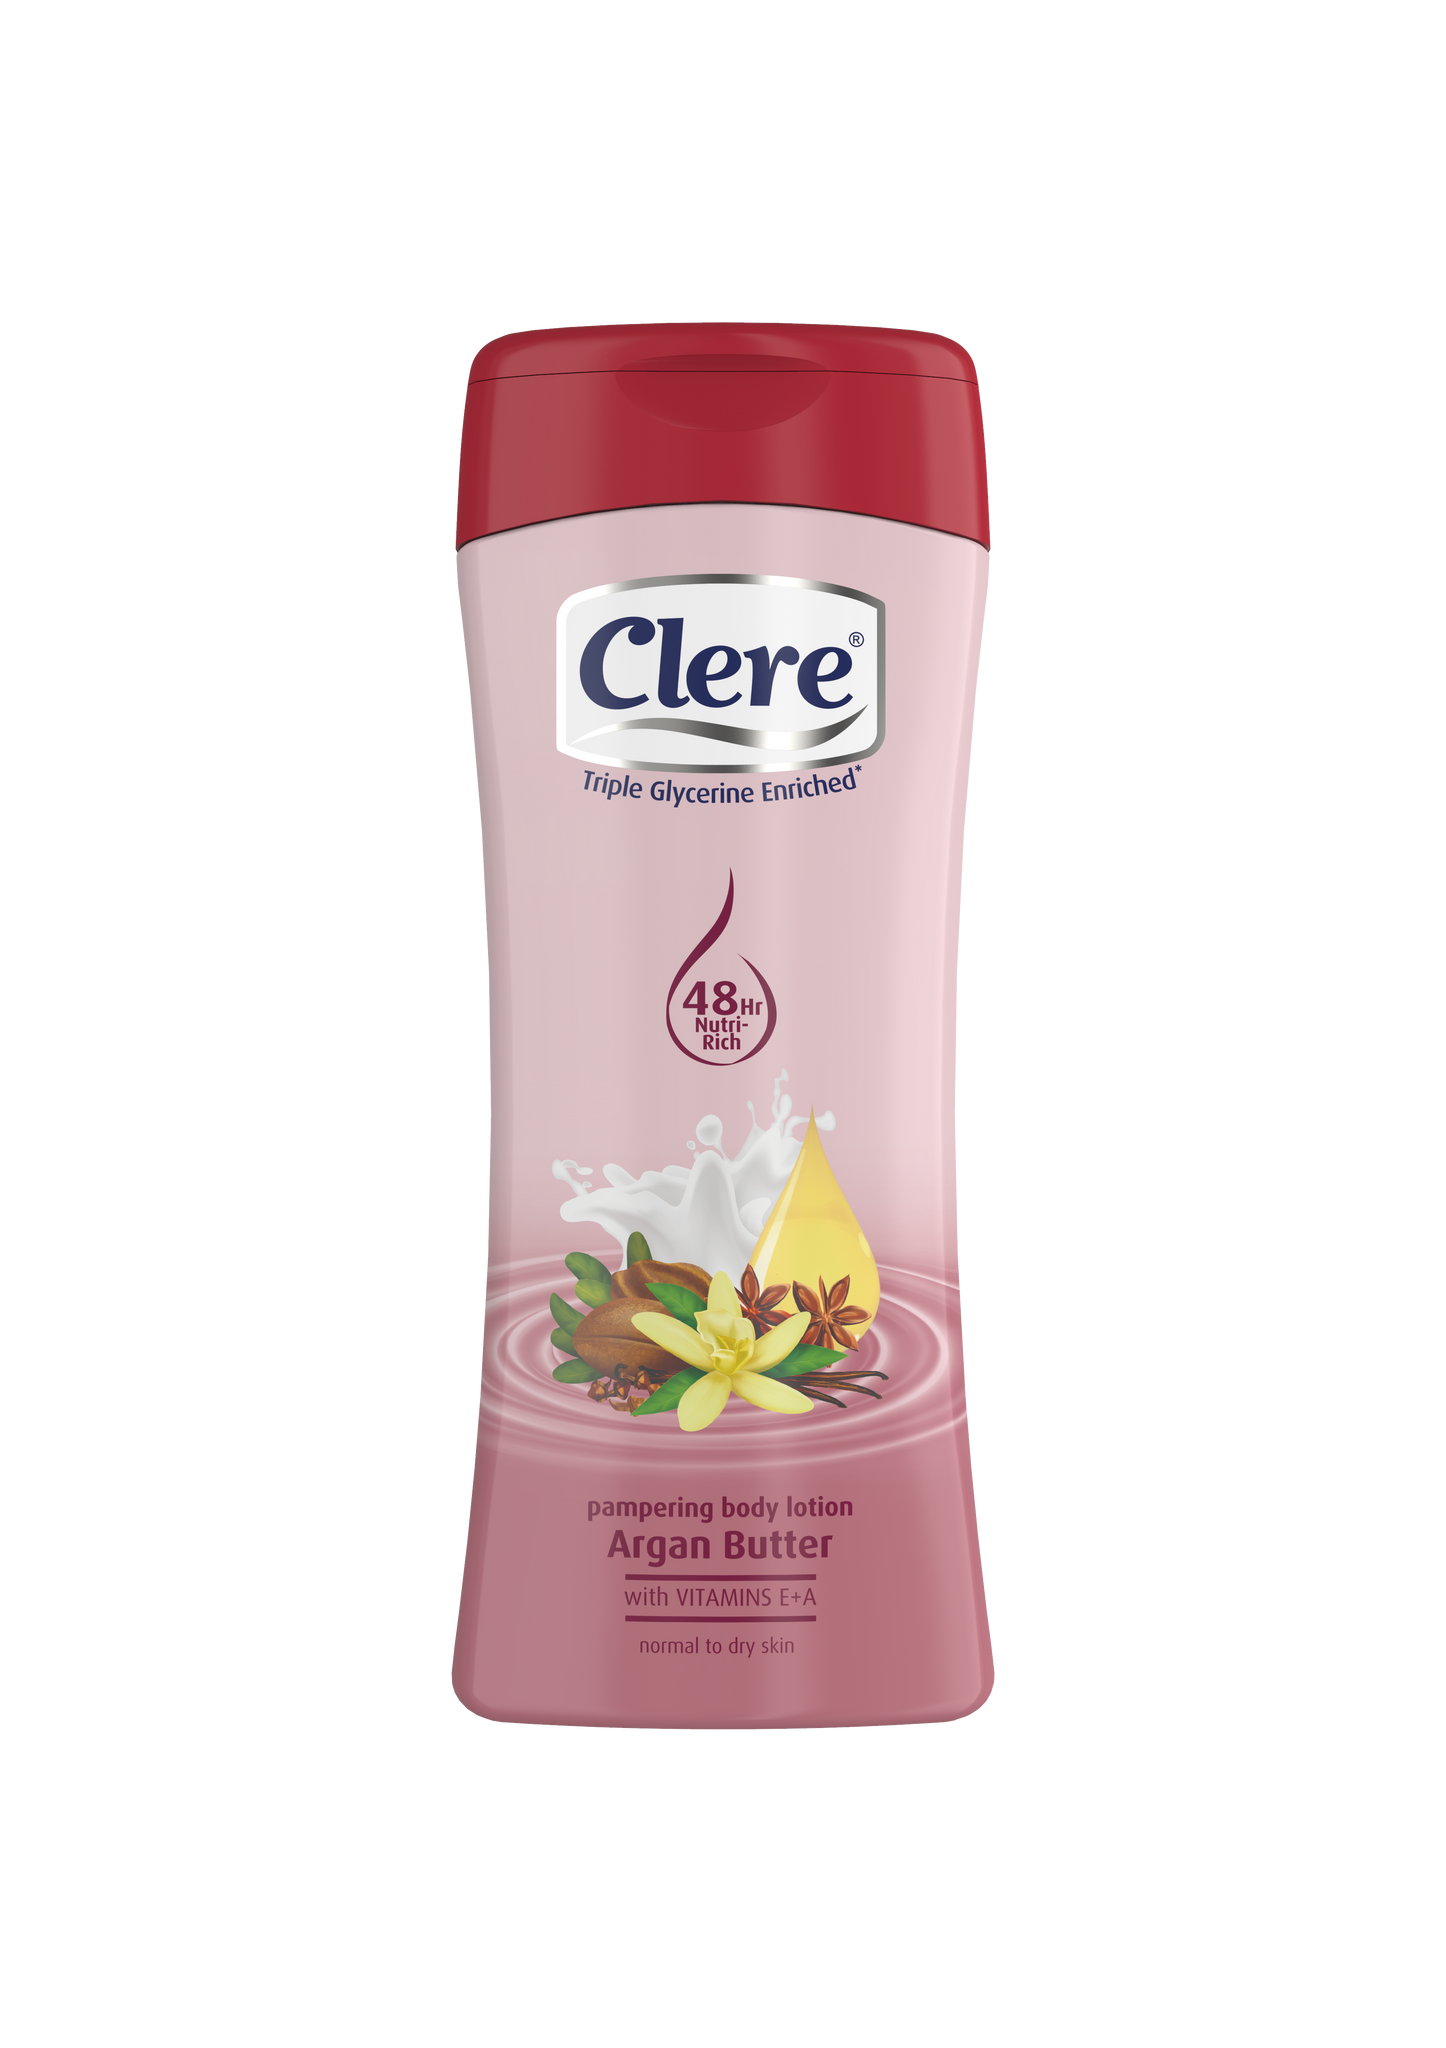 Clere Hand & Body Lotion - Argan Butter - 400ml